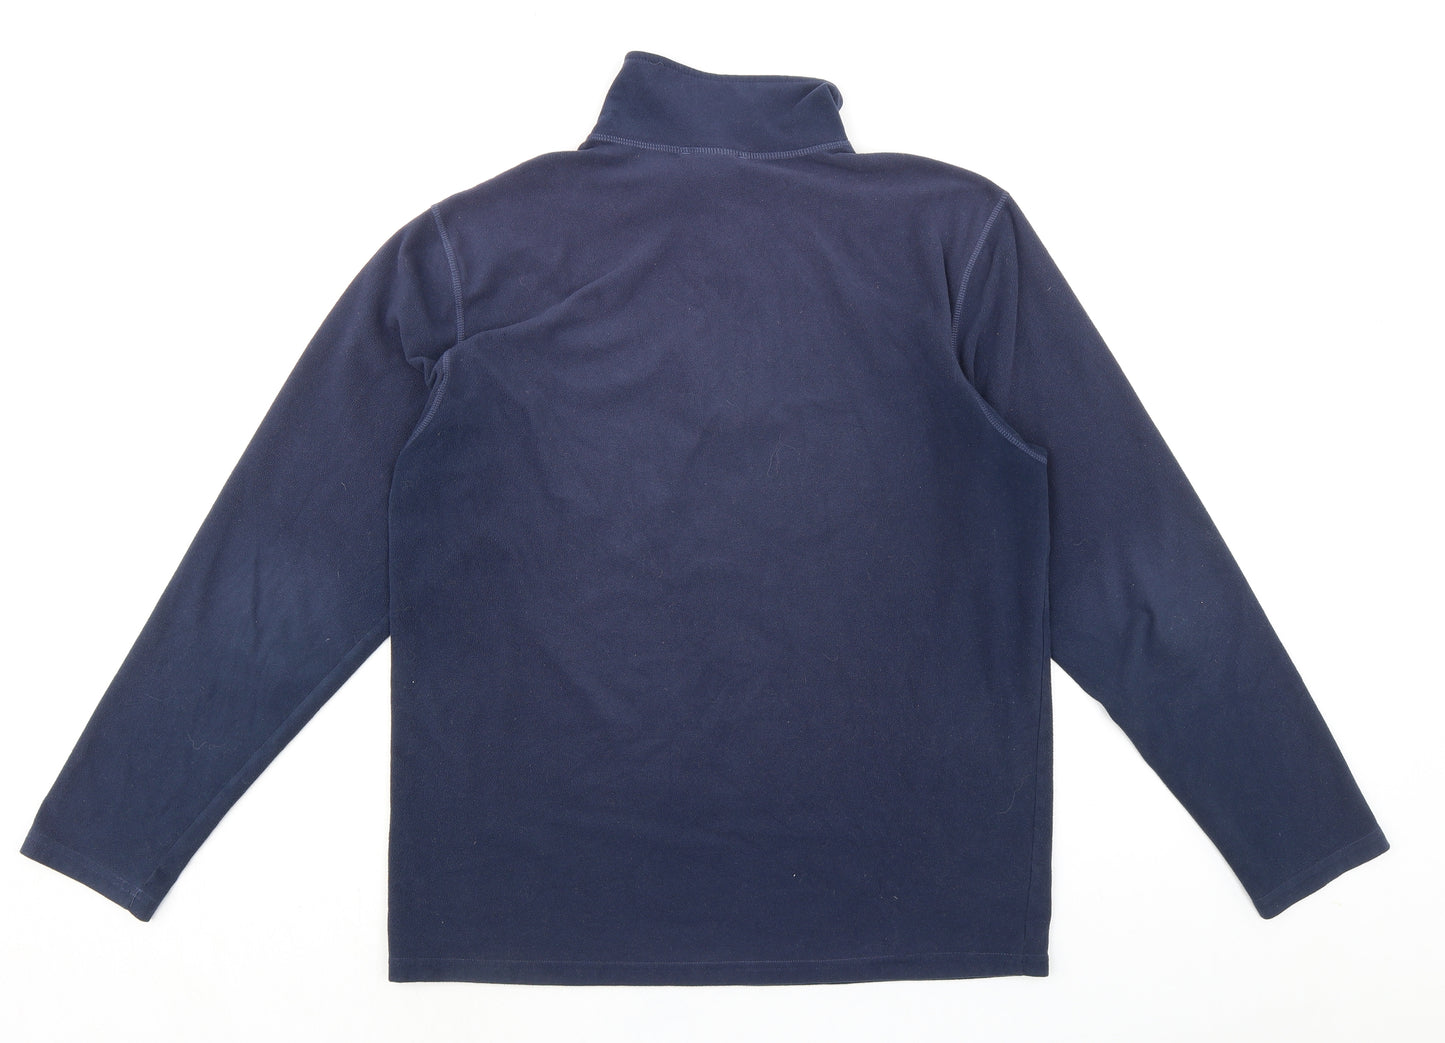 The North Face Mens Blue Polyester Pullover Sweatshirt Size M - 1/4 Zip